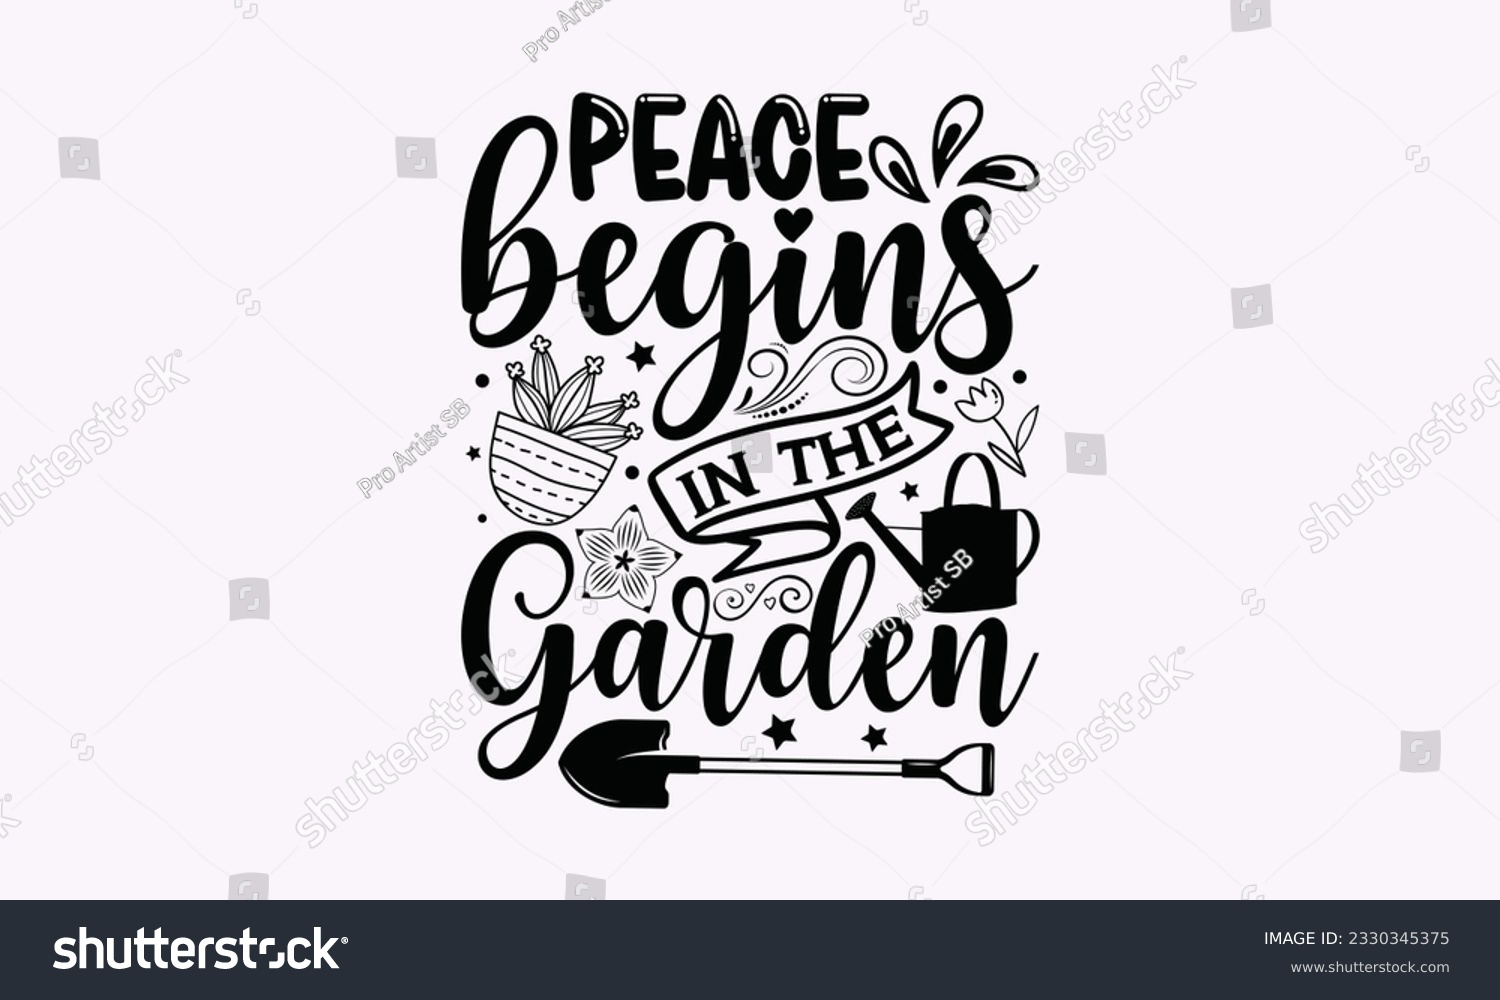 SVG of Peace begins in the garden - Gardening SVG Design, Flower Quotes, Calligraphy graphic design, Typography poster with old style camera and quote. svg